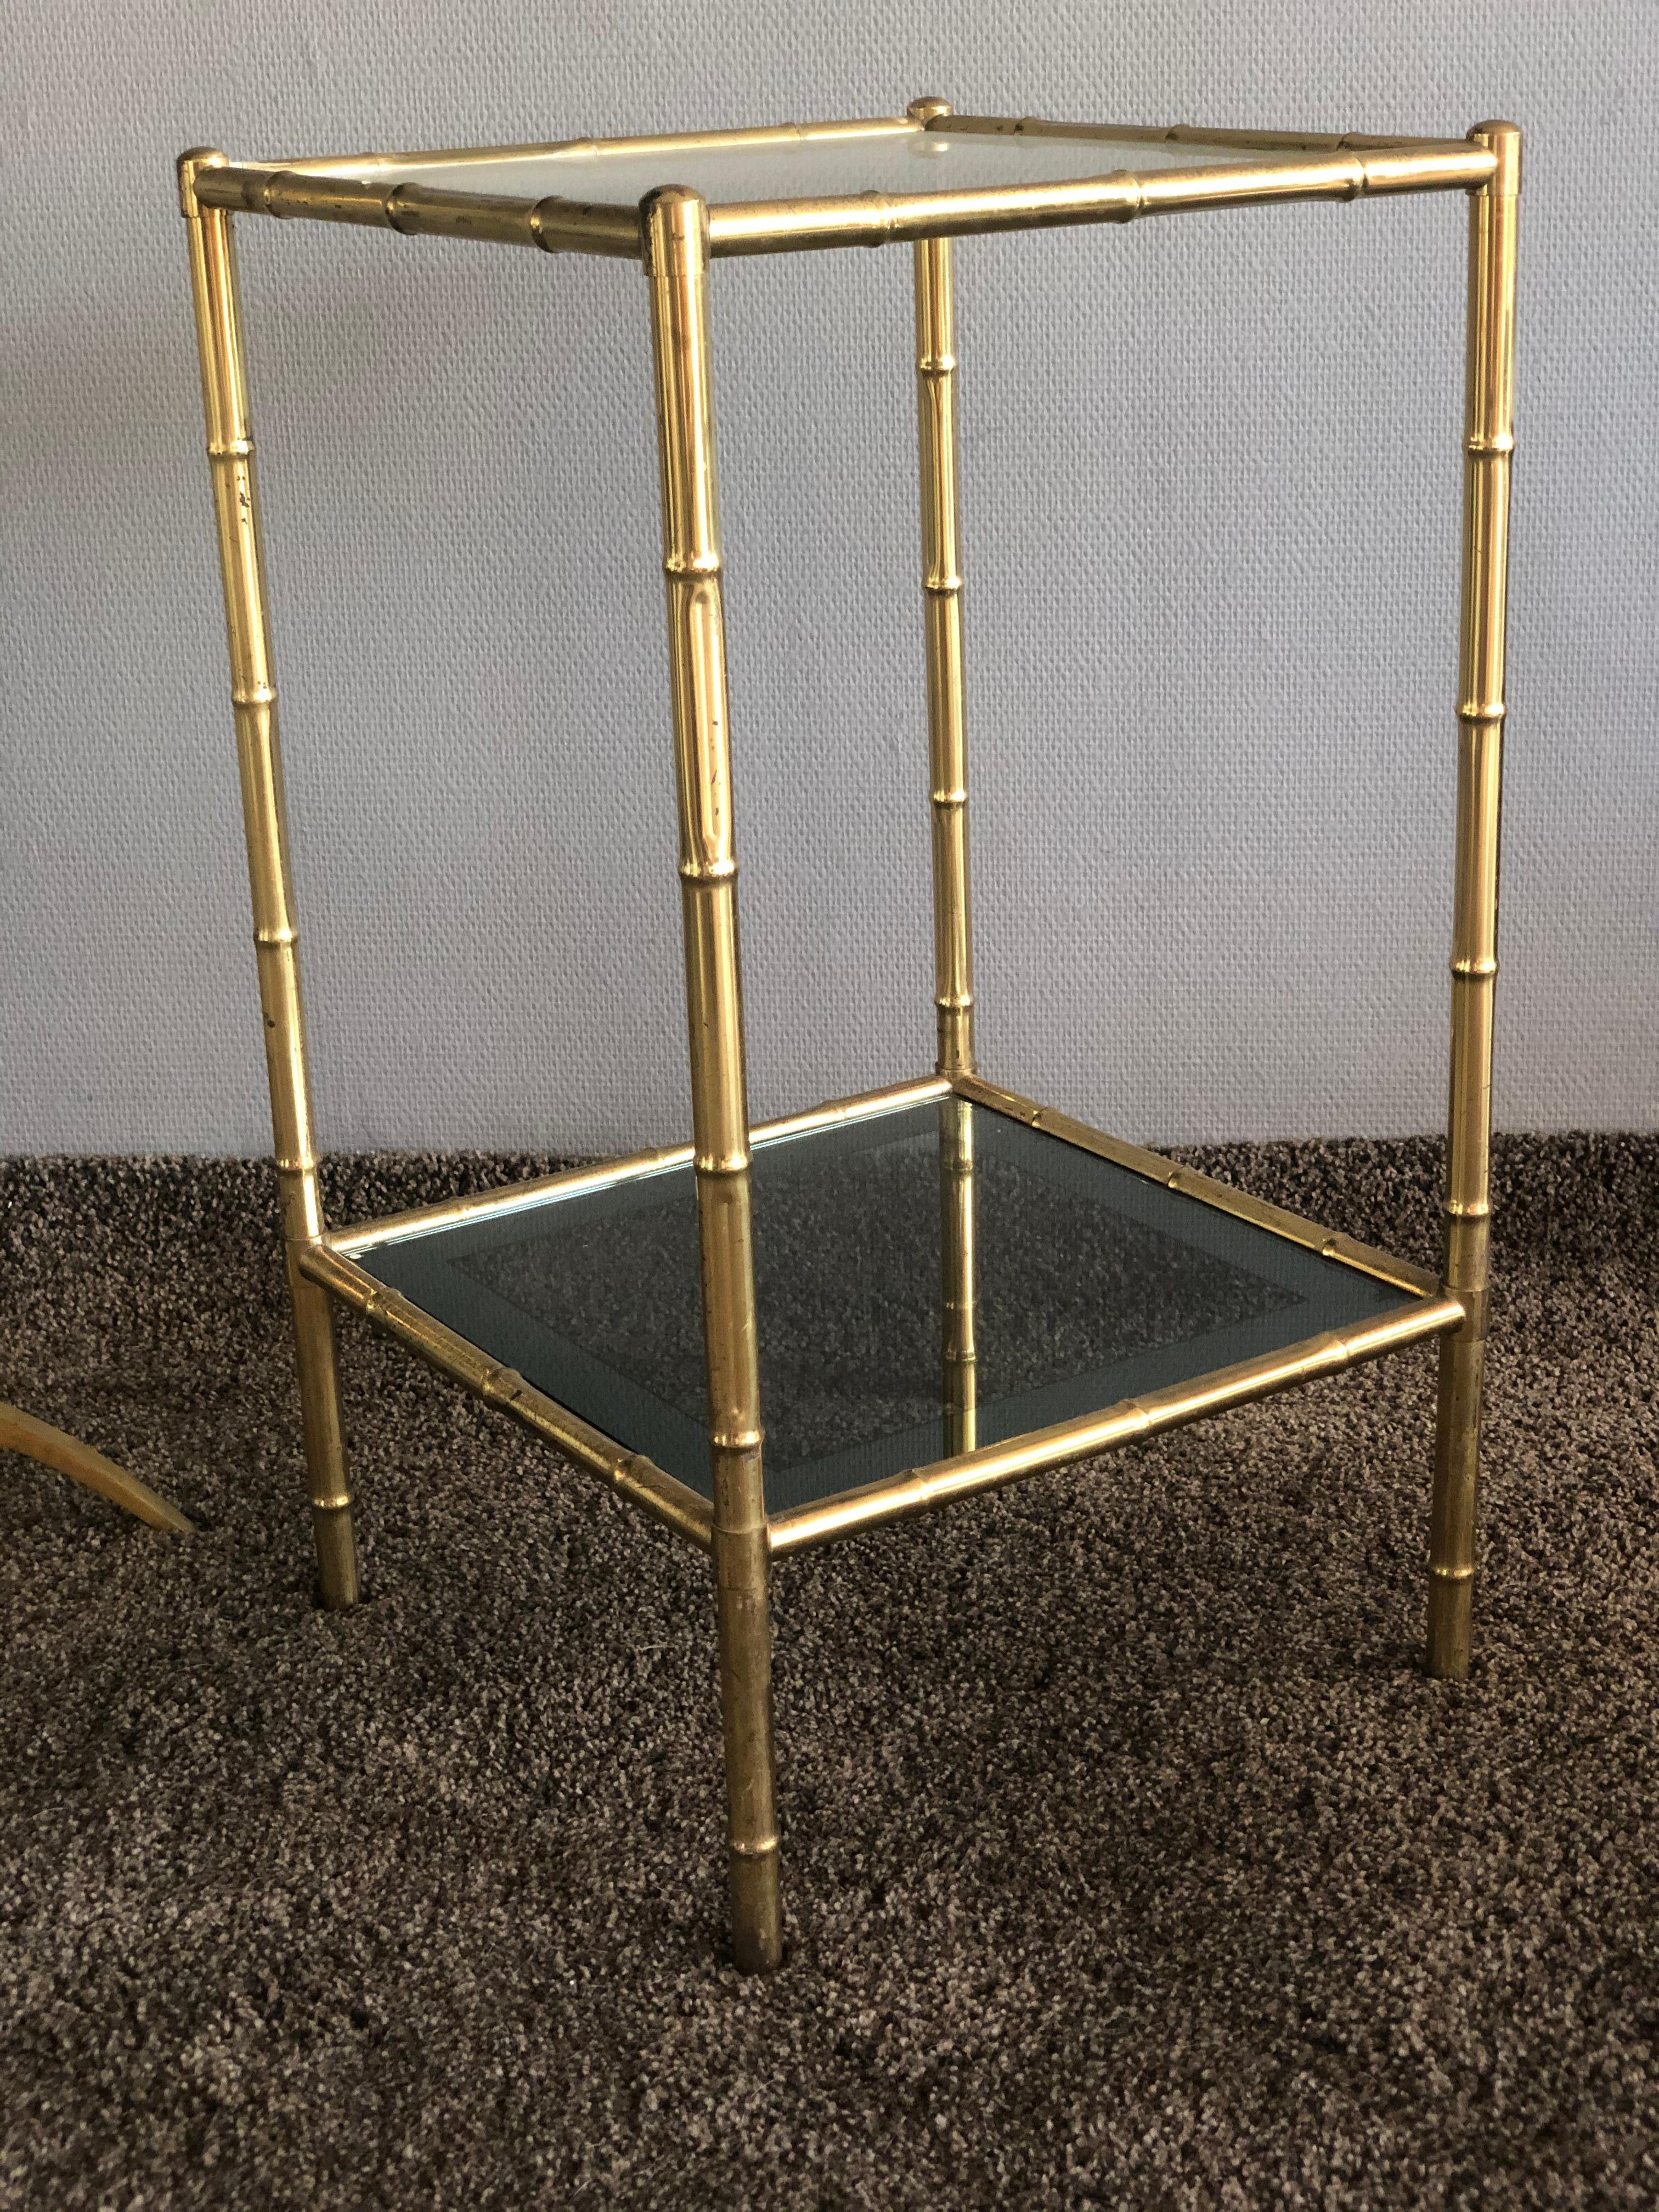 Imitation bamboo sellette, double tray in mirrored and clear glass, brass and mirrored glass, Maison Bagues. H 70 x W 40 cm. France, circa 1960. A rare and elegant model.